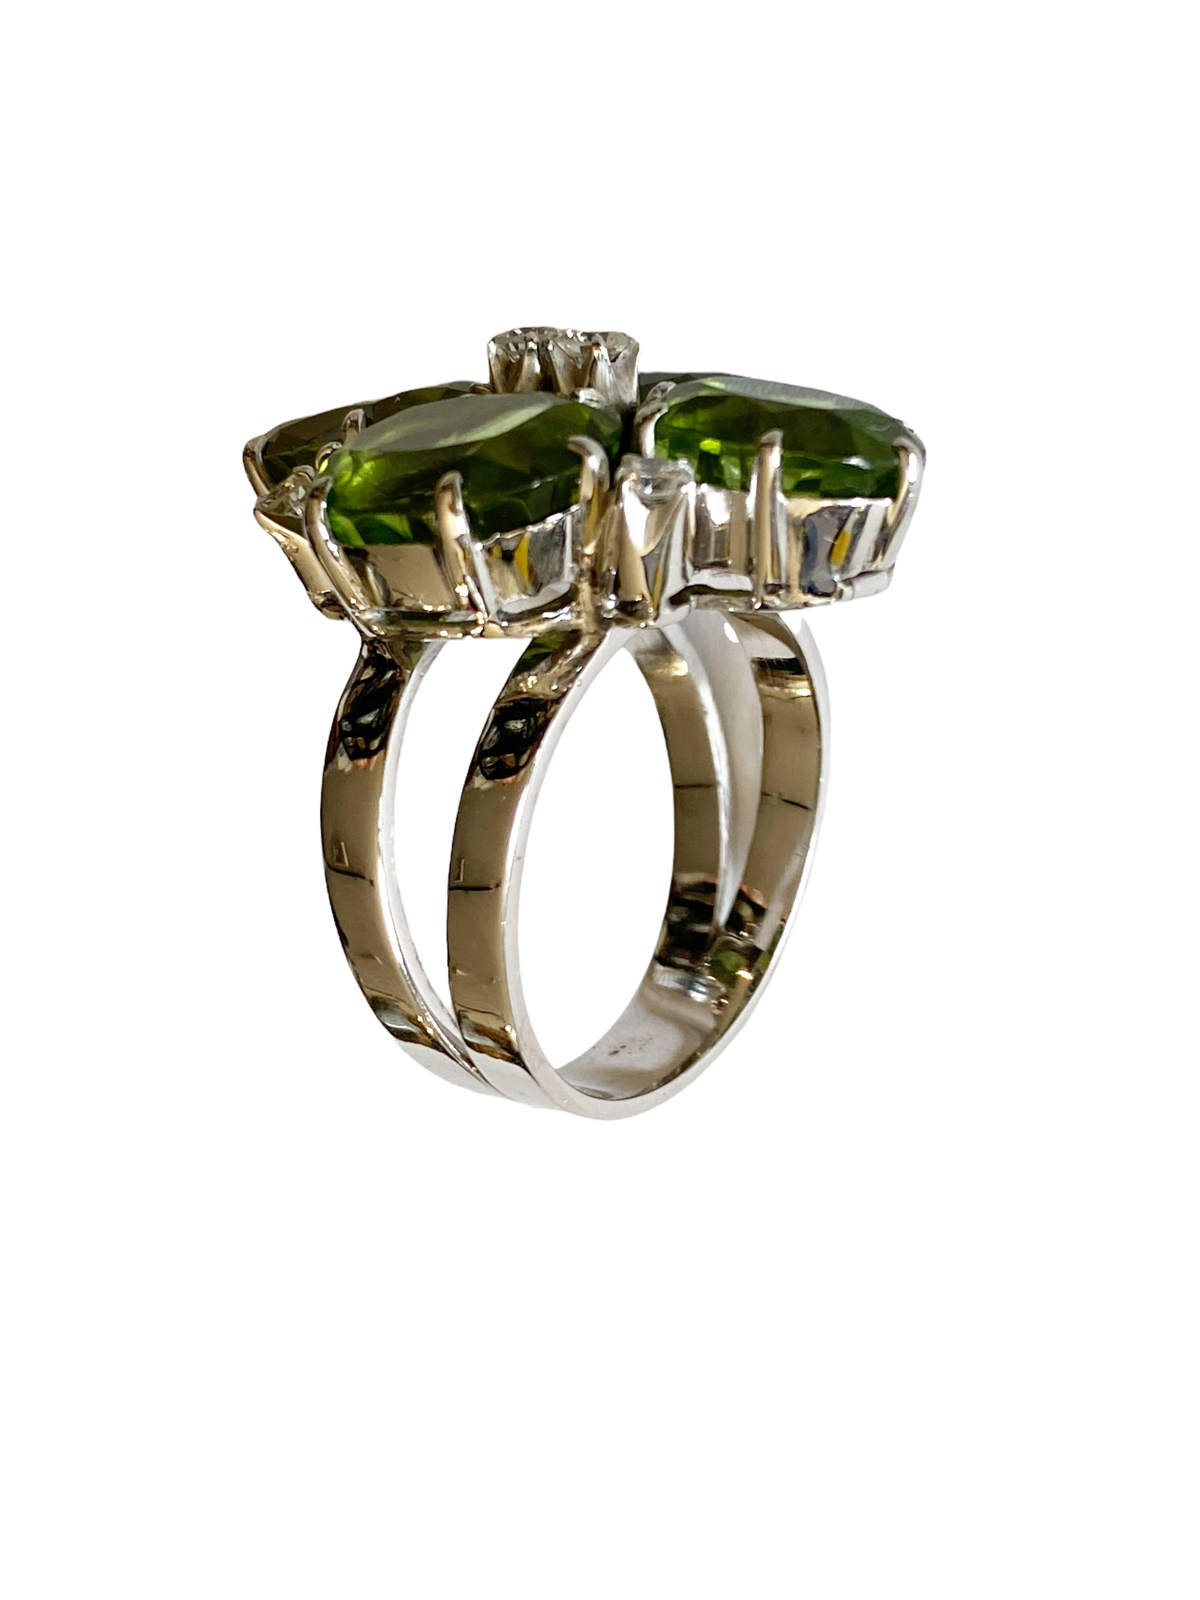 #4780 Mid century 18k White Gold Cocktail Peridot and Diamond Ring